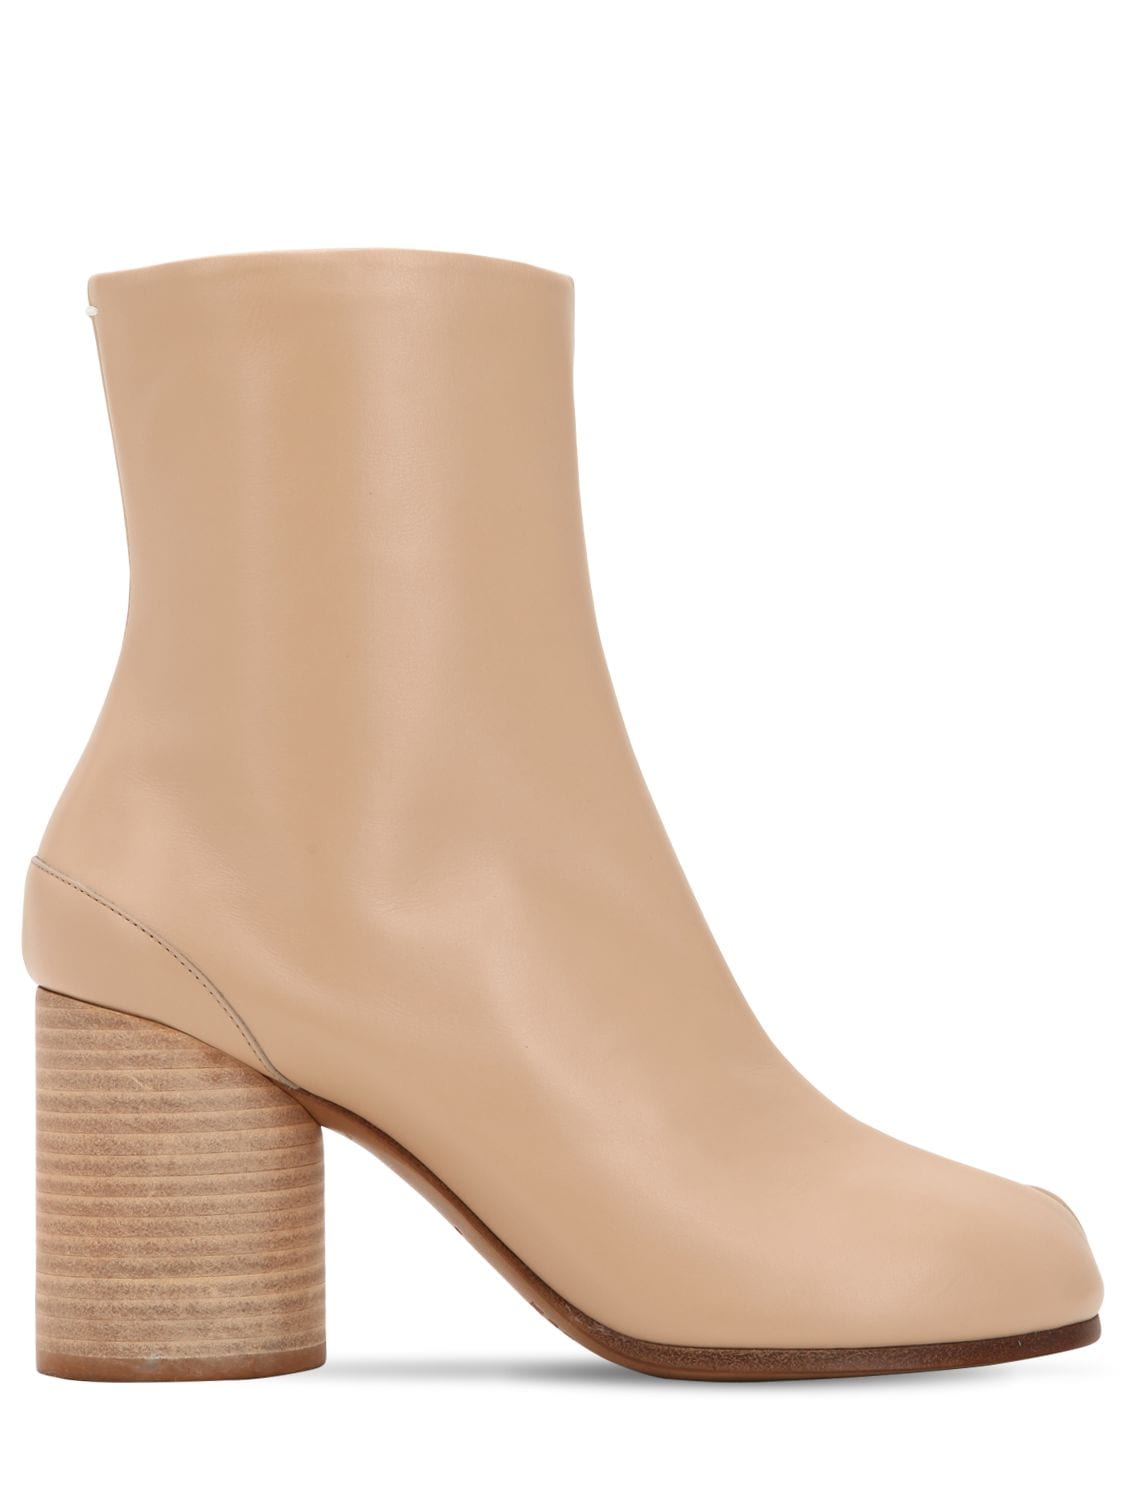 Maison Margiela 80mm Tabi Leather Ankle Boots In Nude